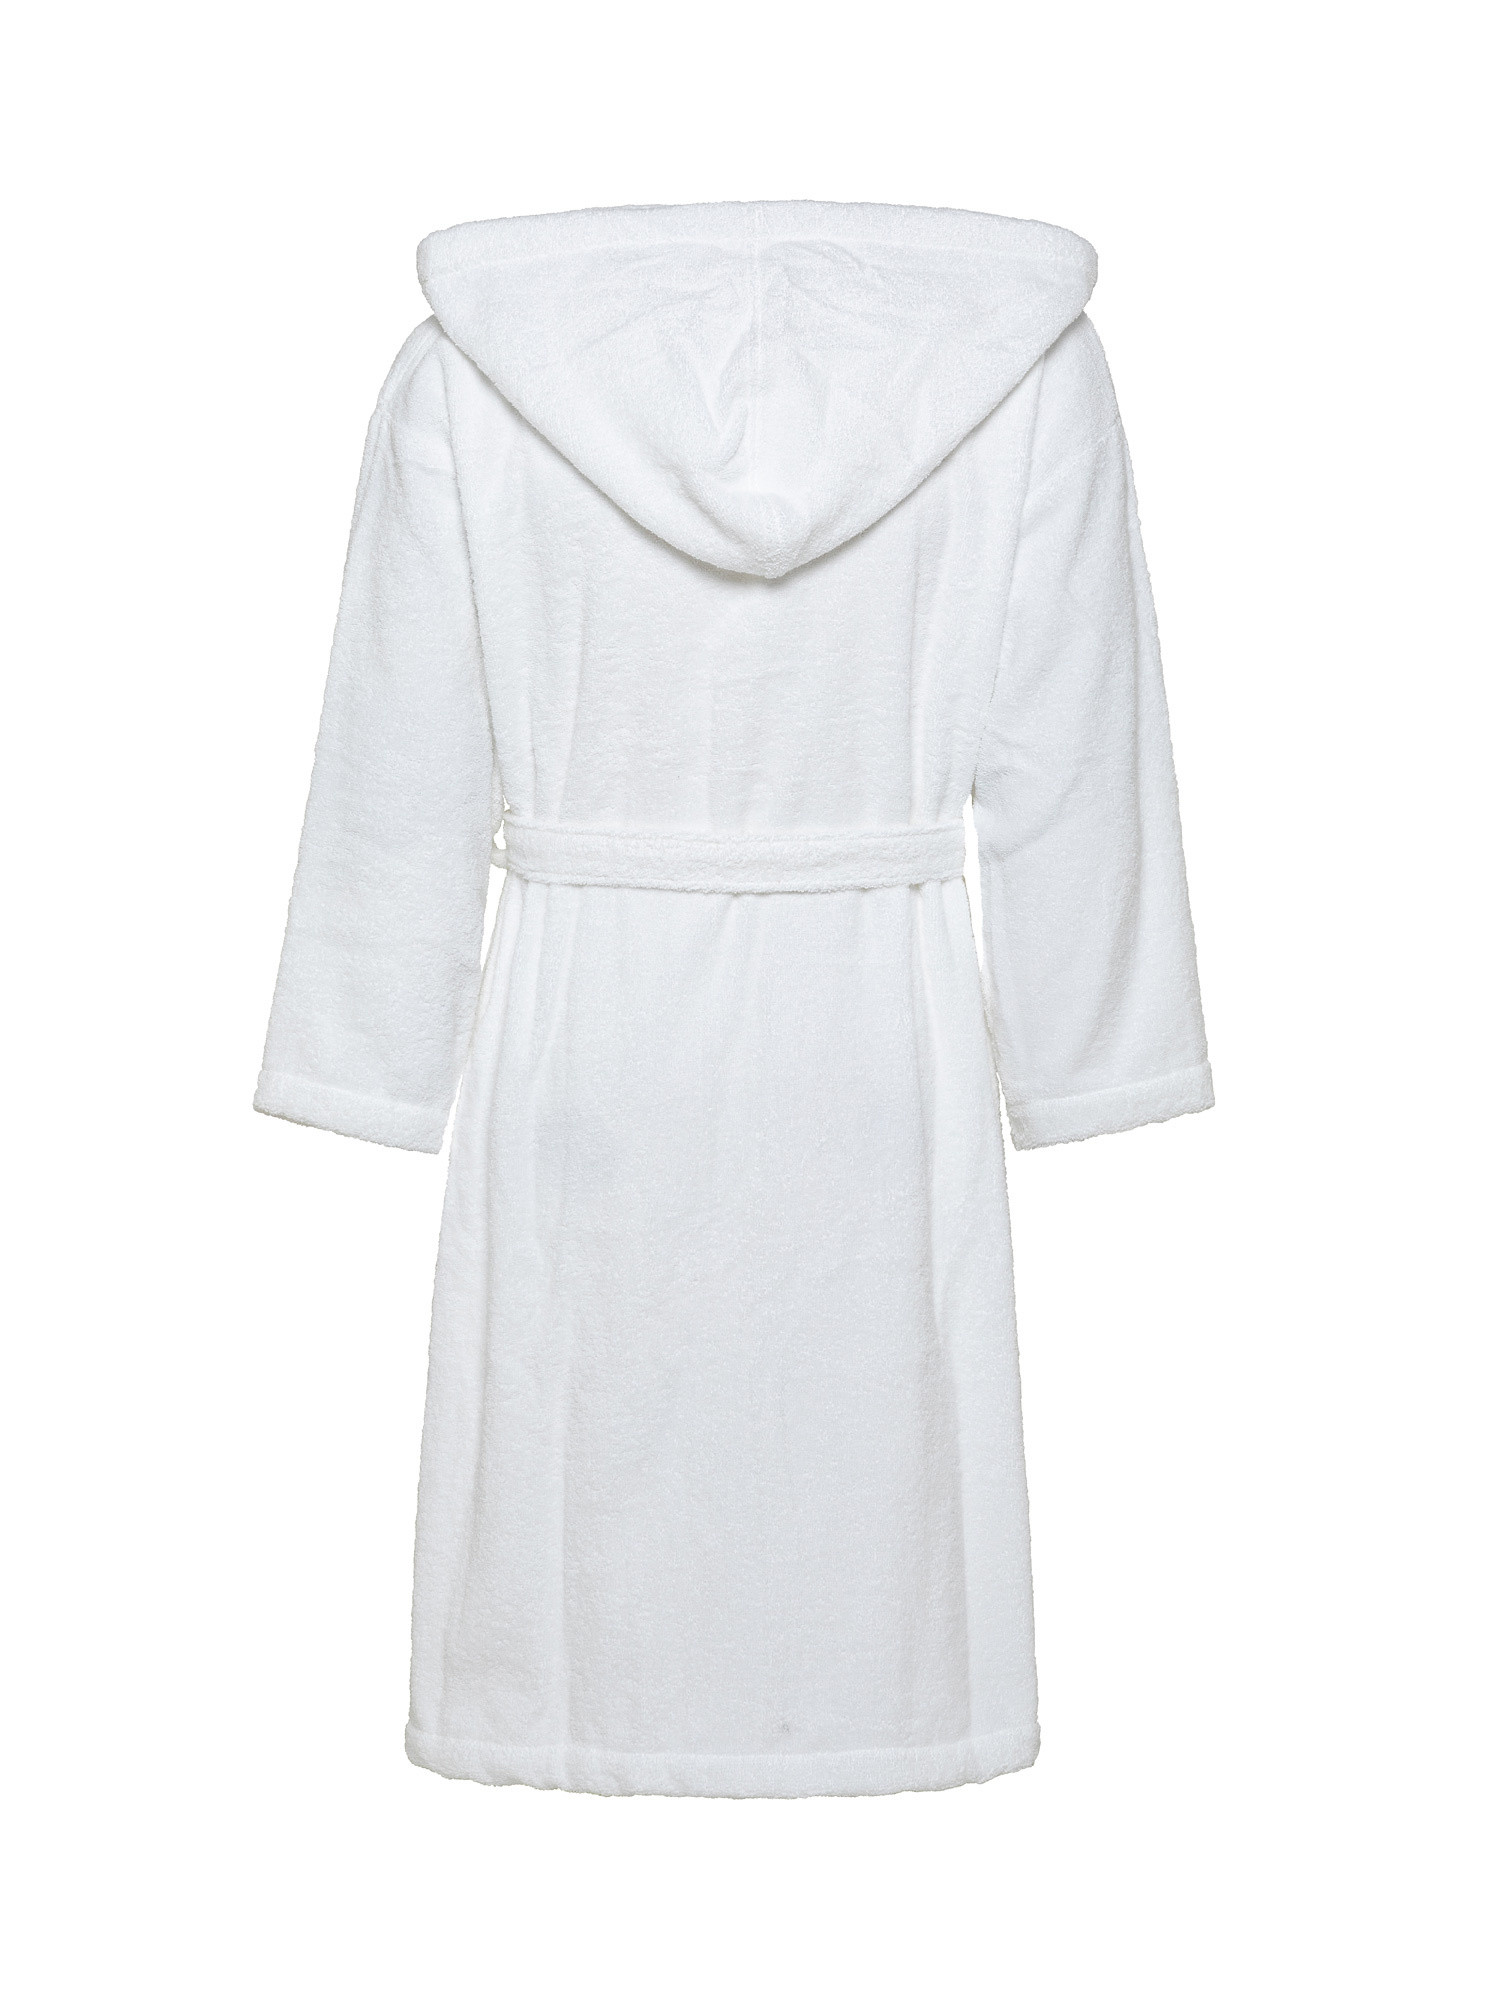 Solid color cotton terry bathrobe, White, large image number 1